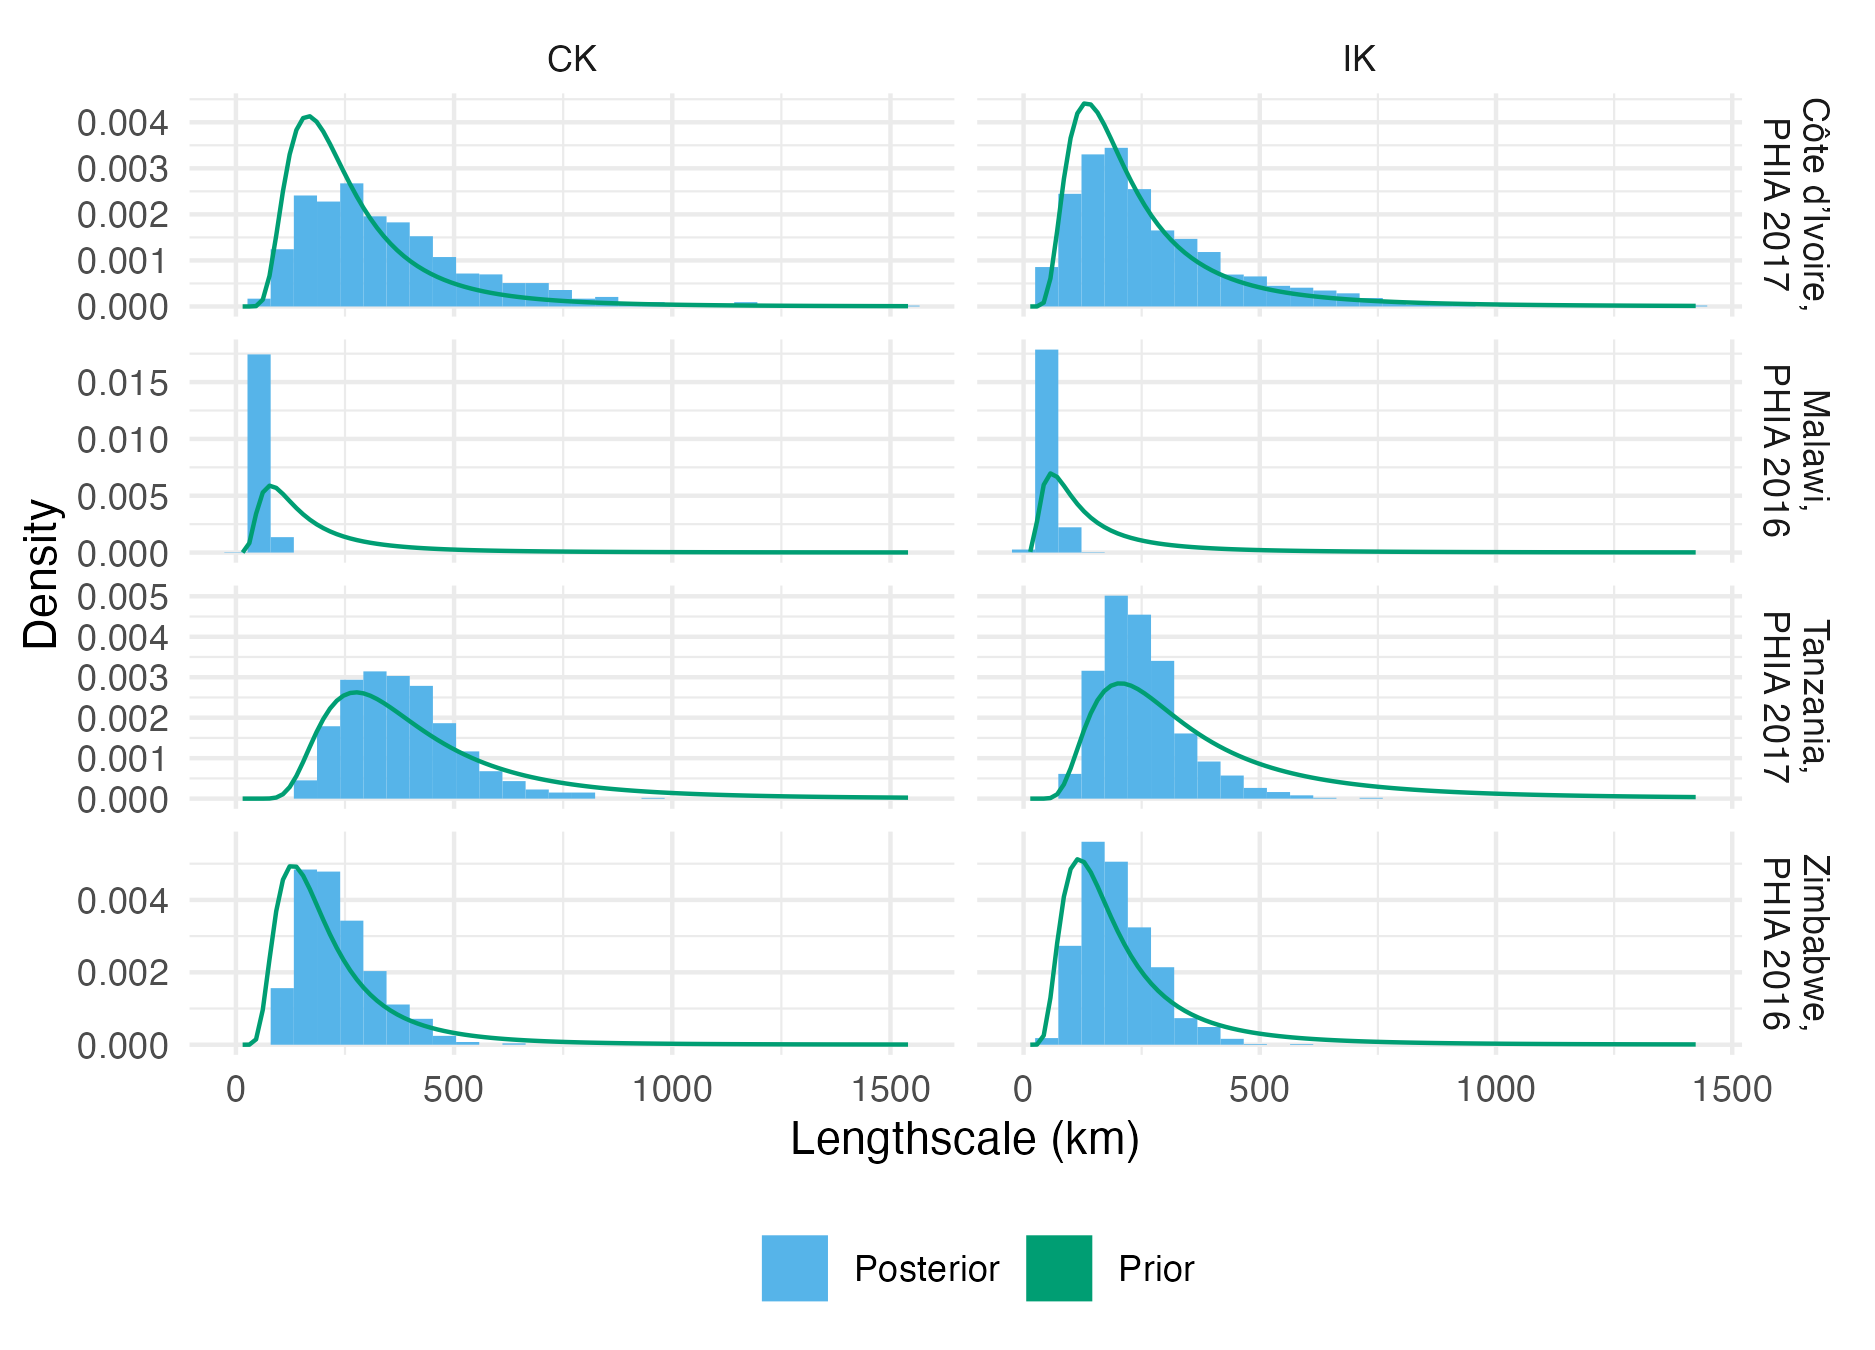 The lengthscale hyperparameter prior and posterior distributions for each of the four considered PHIA surveys (Table 4.3), using both the CK and IK inferential models.